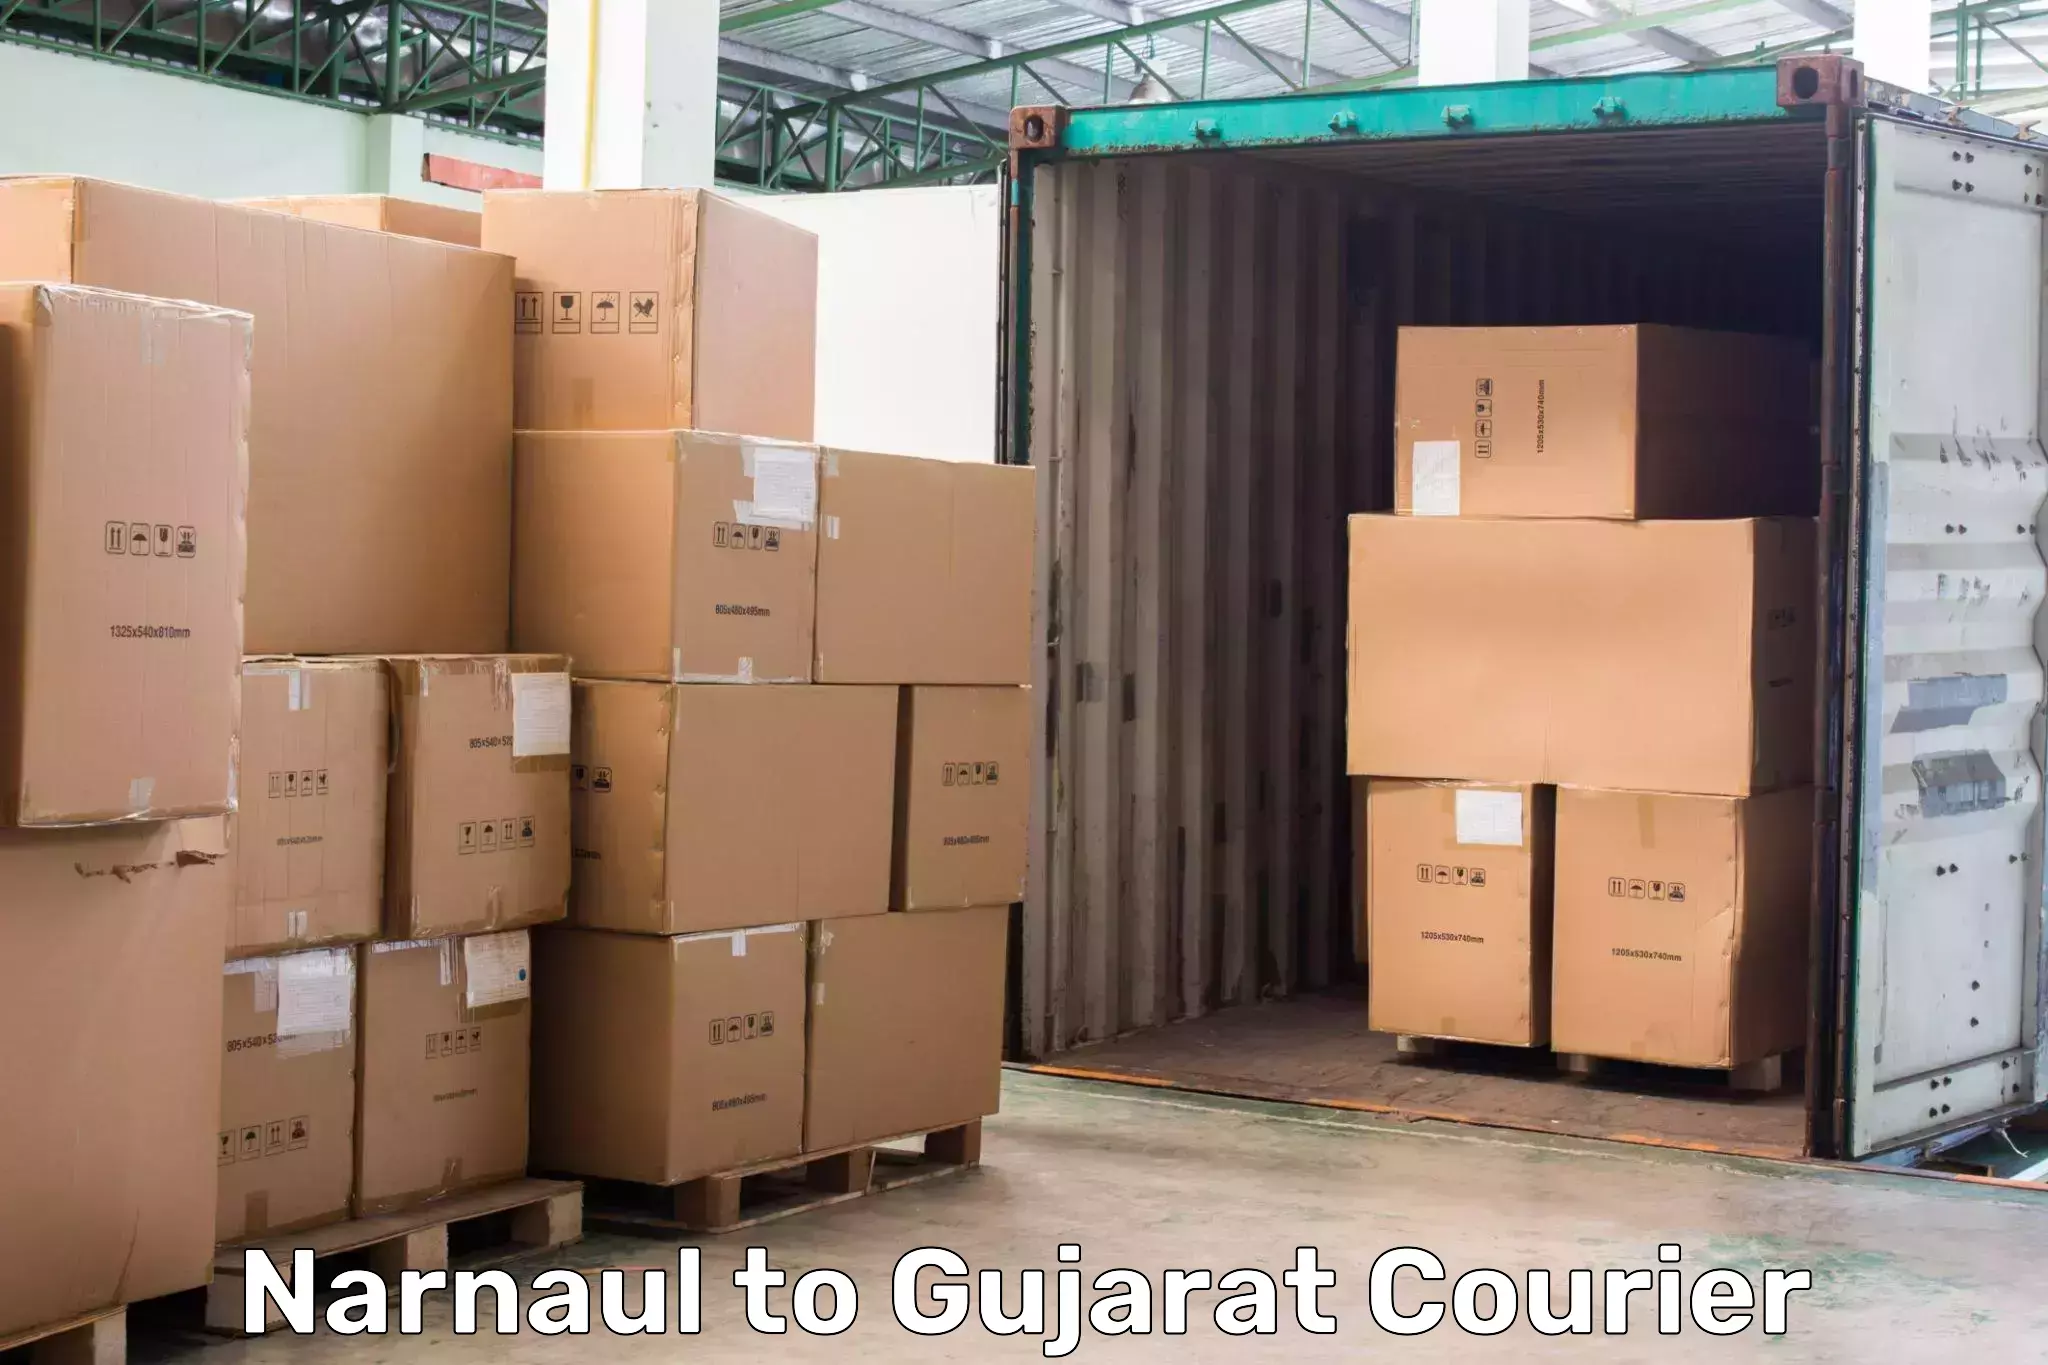 Courier service comparison Narnaul to Matar